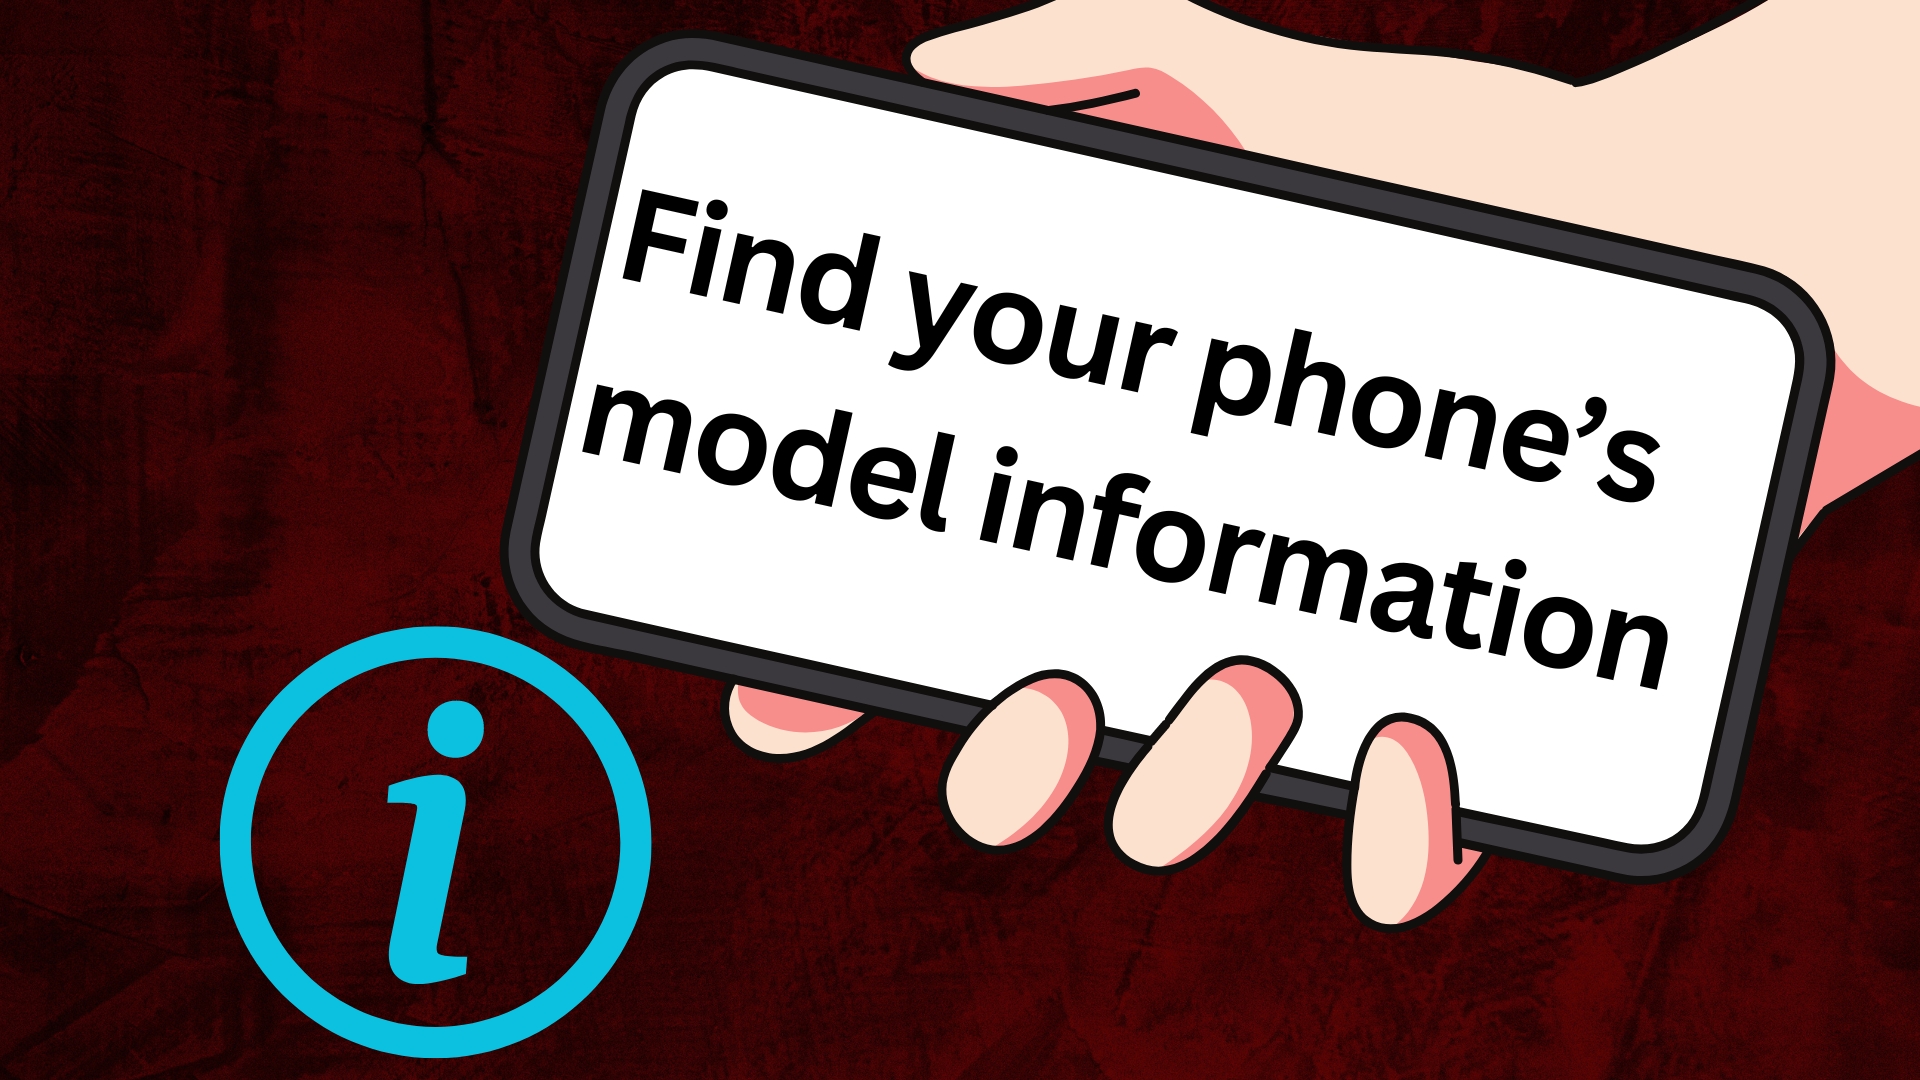 Find your phone's model information